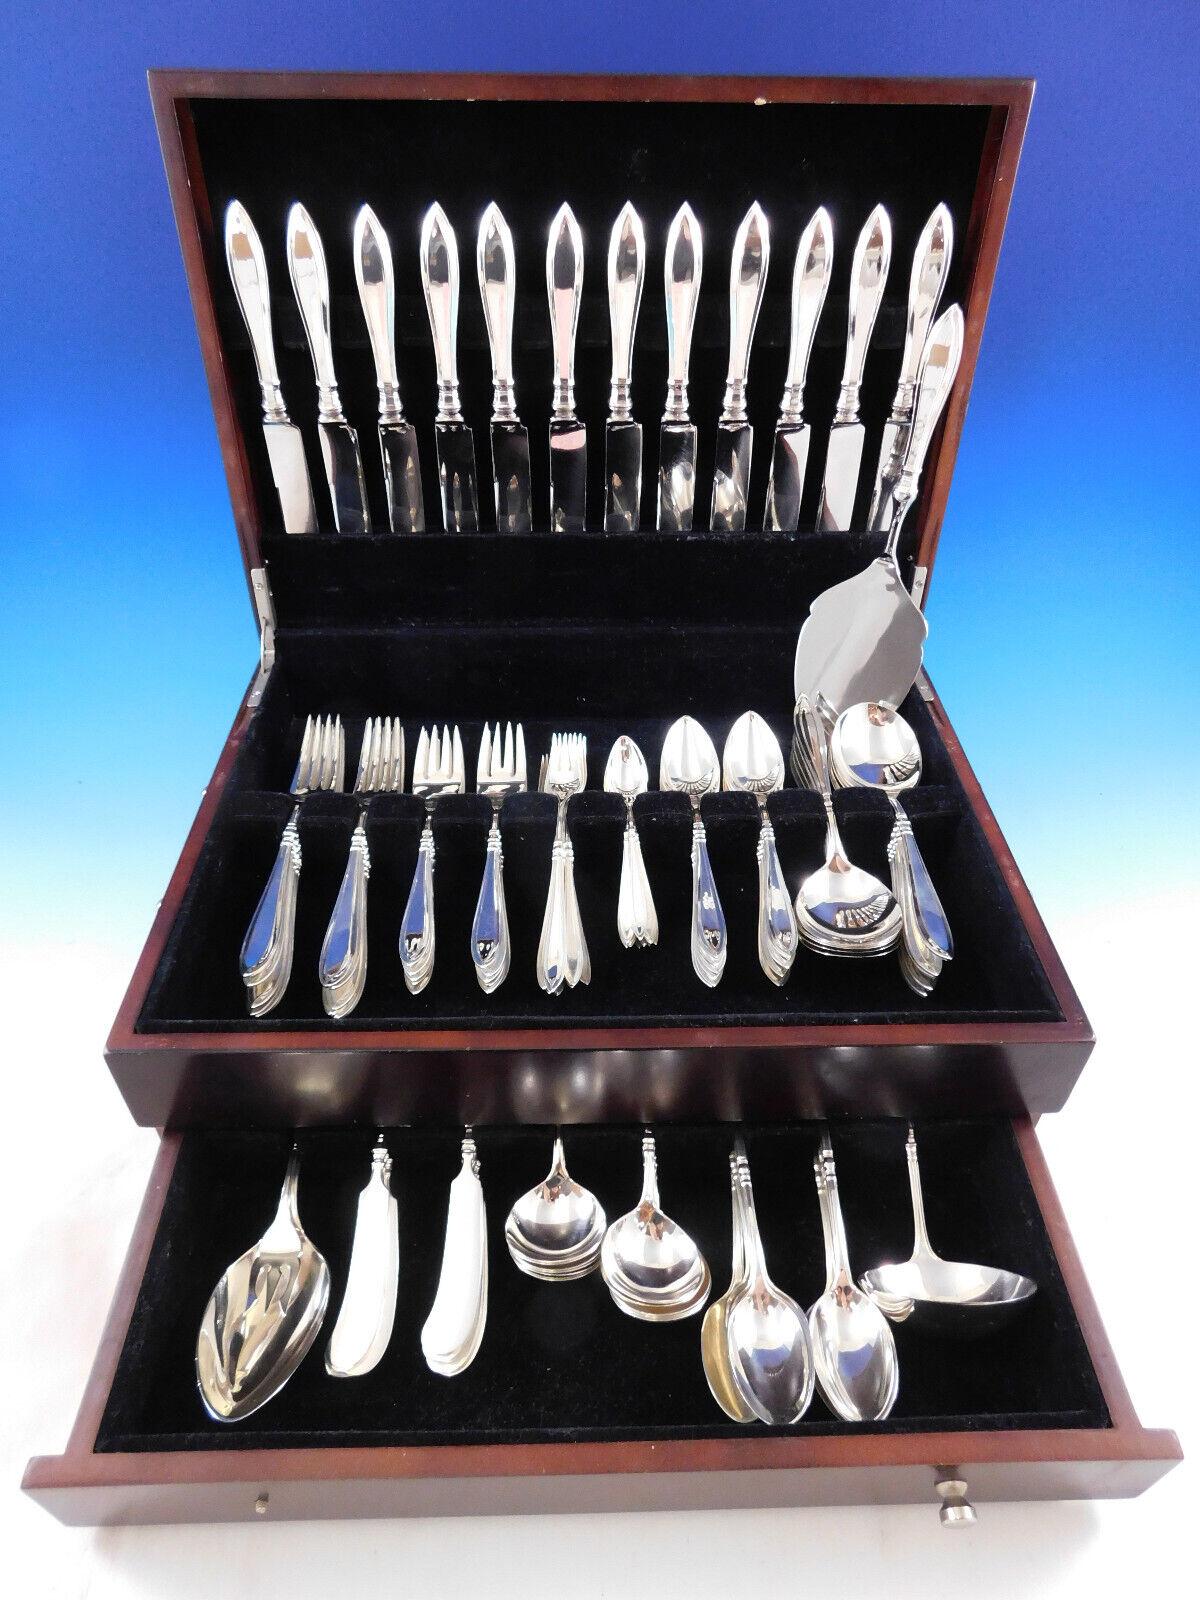 Superb Portsmouth by Gorham sterling silver flatware set - 98 pieces. This pattern features a timeless pointed unadorned handle design. This set includes:

12 Knives, 8 1/2